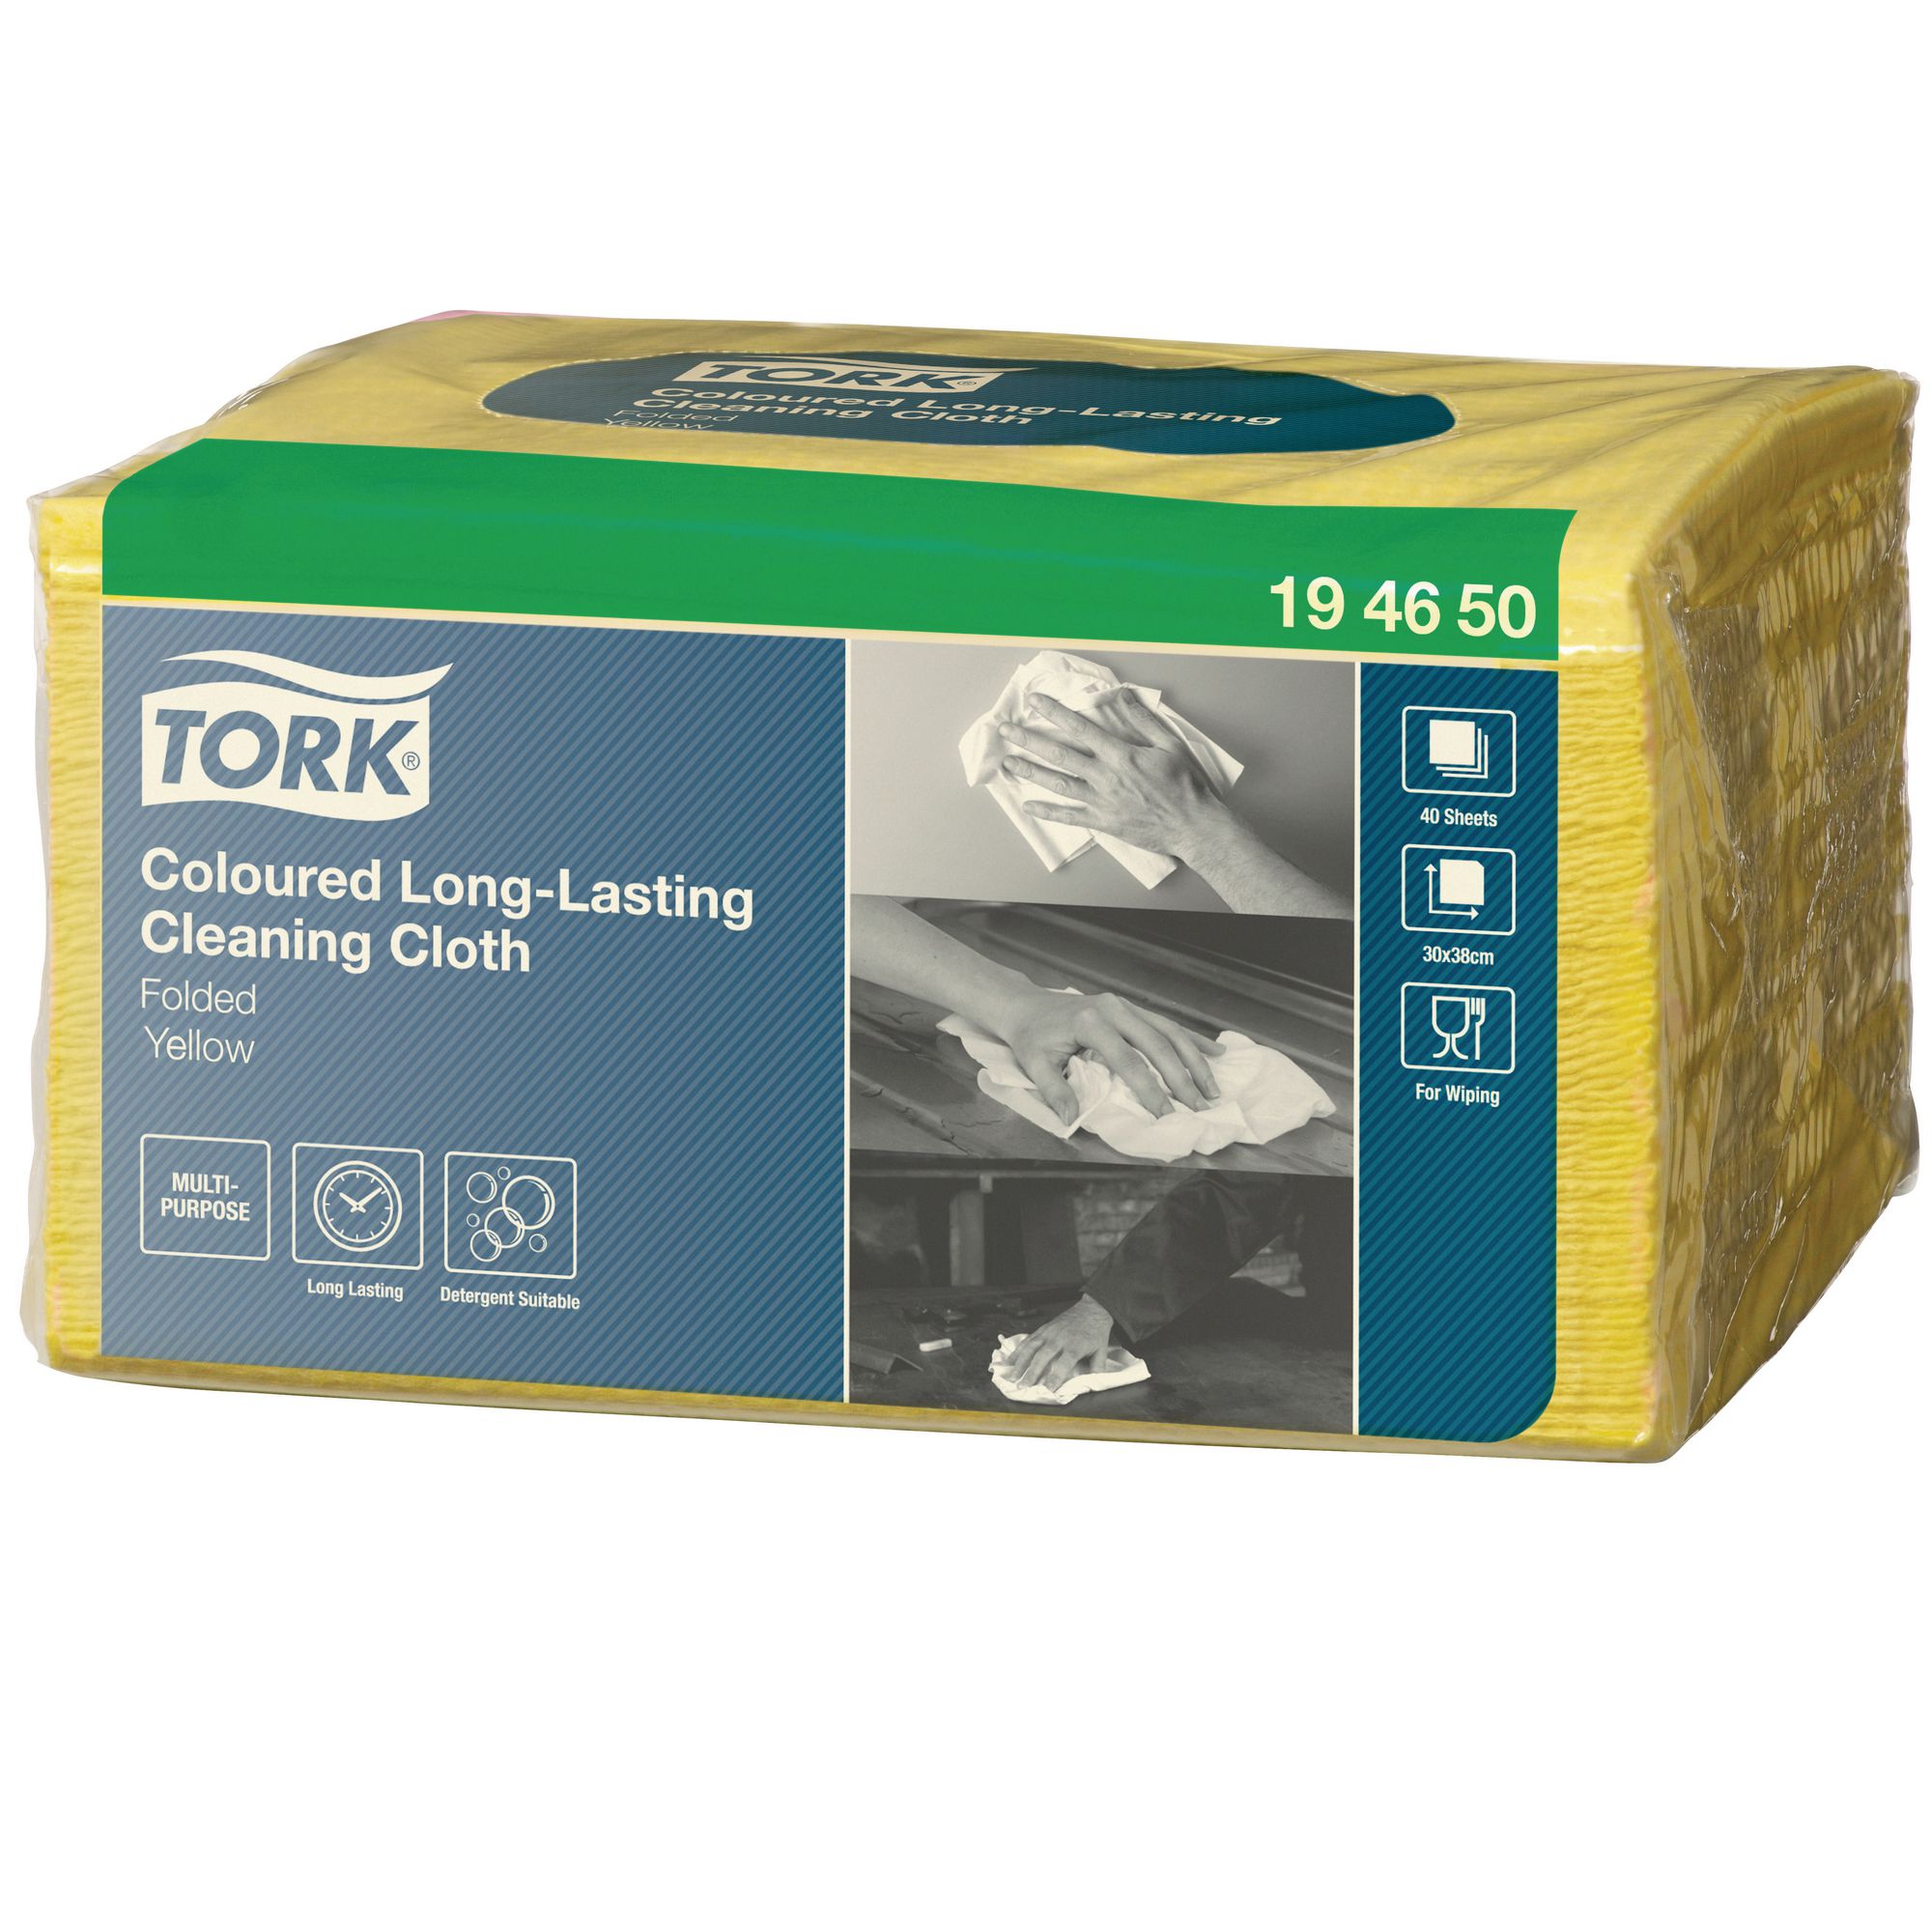 Tork Yellow Long-lasting Cleaning Cloth